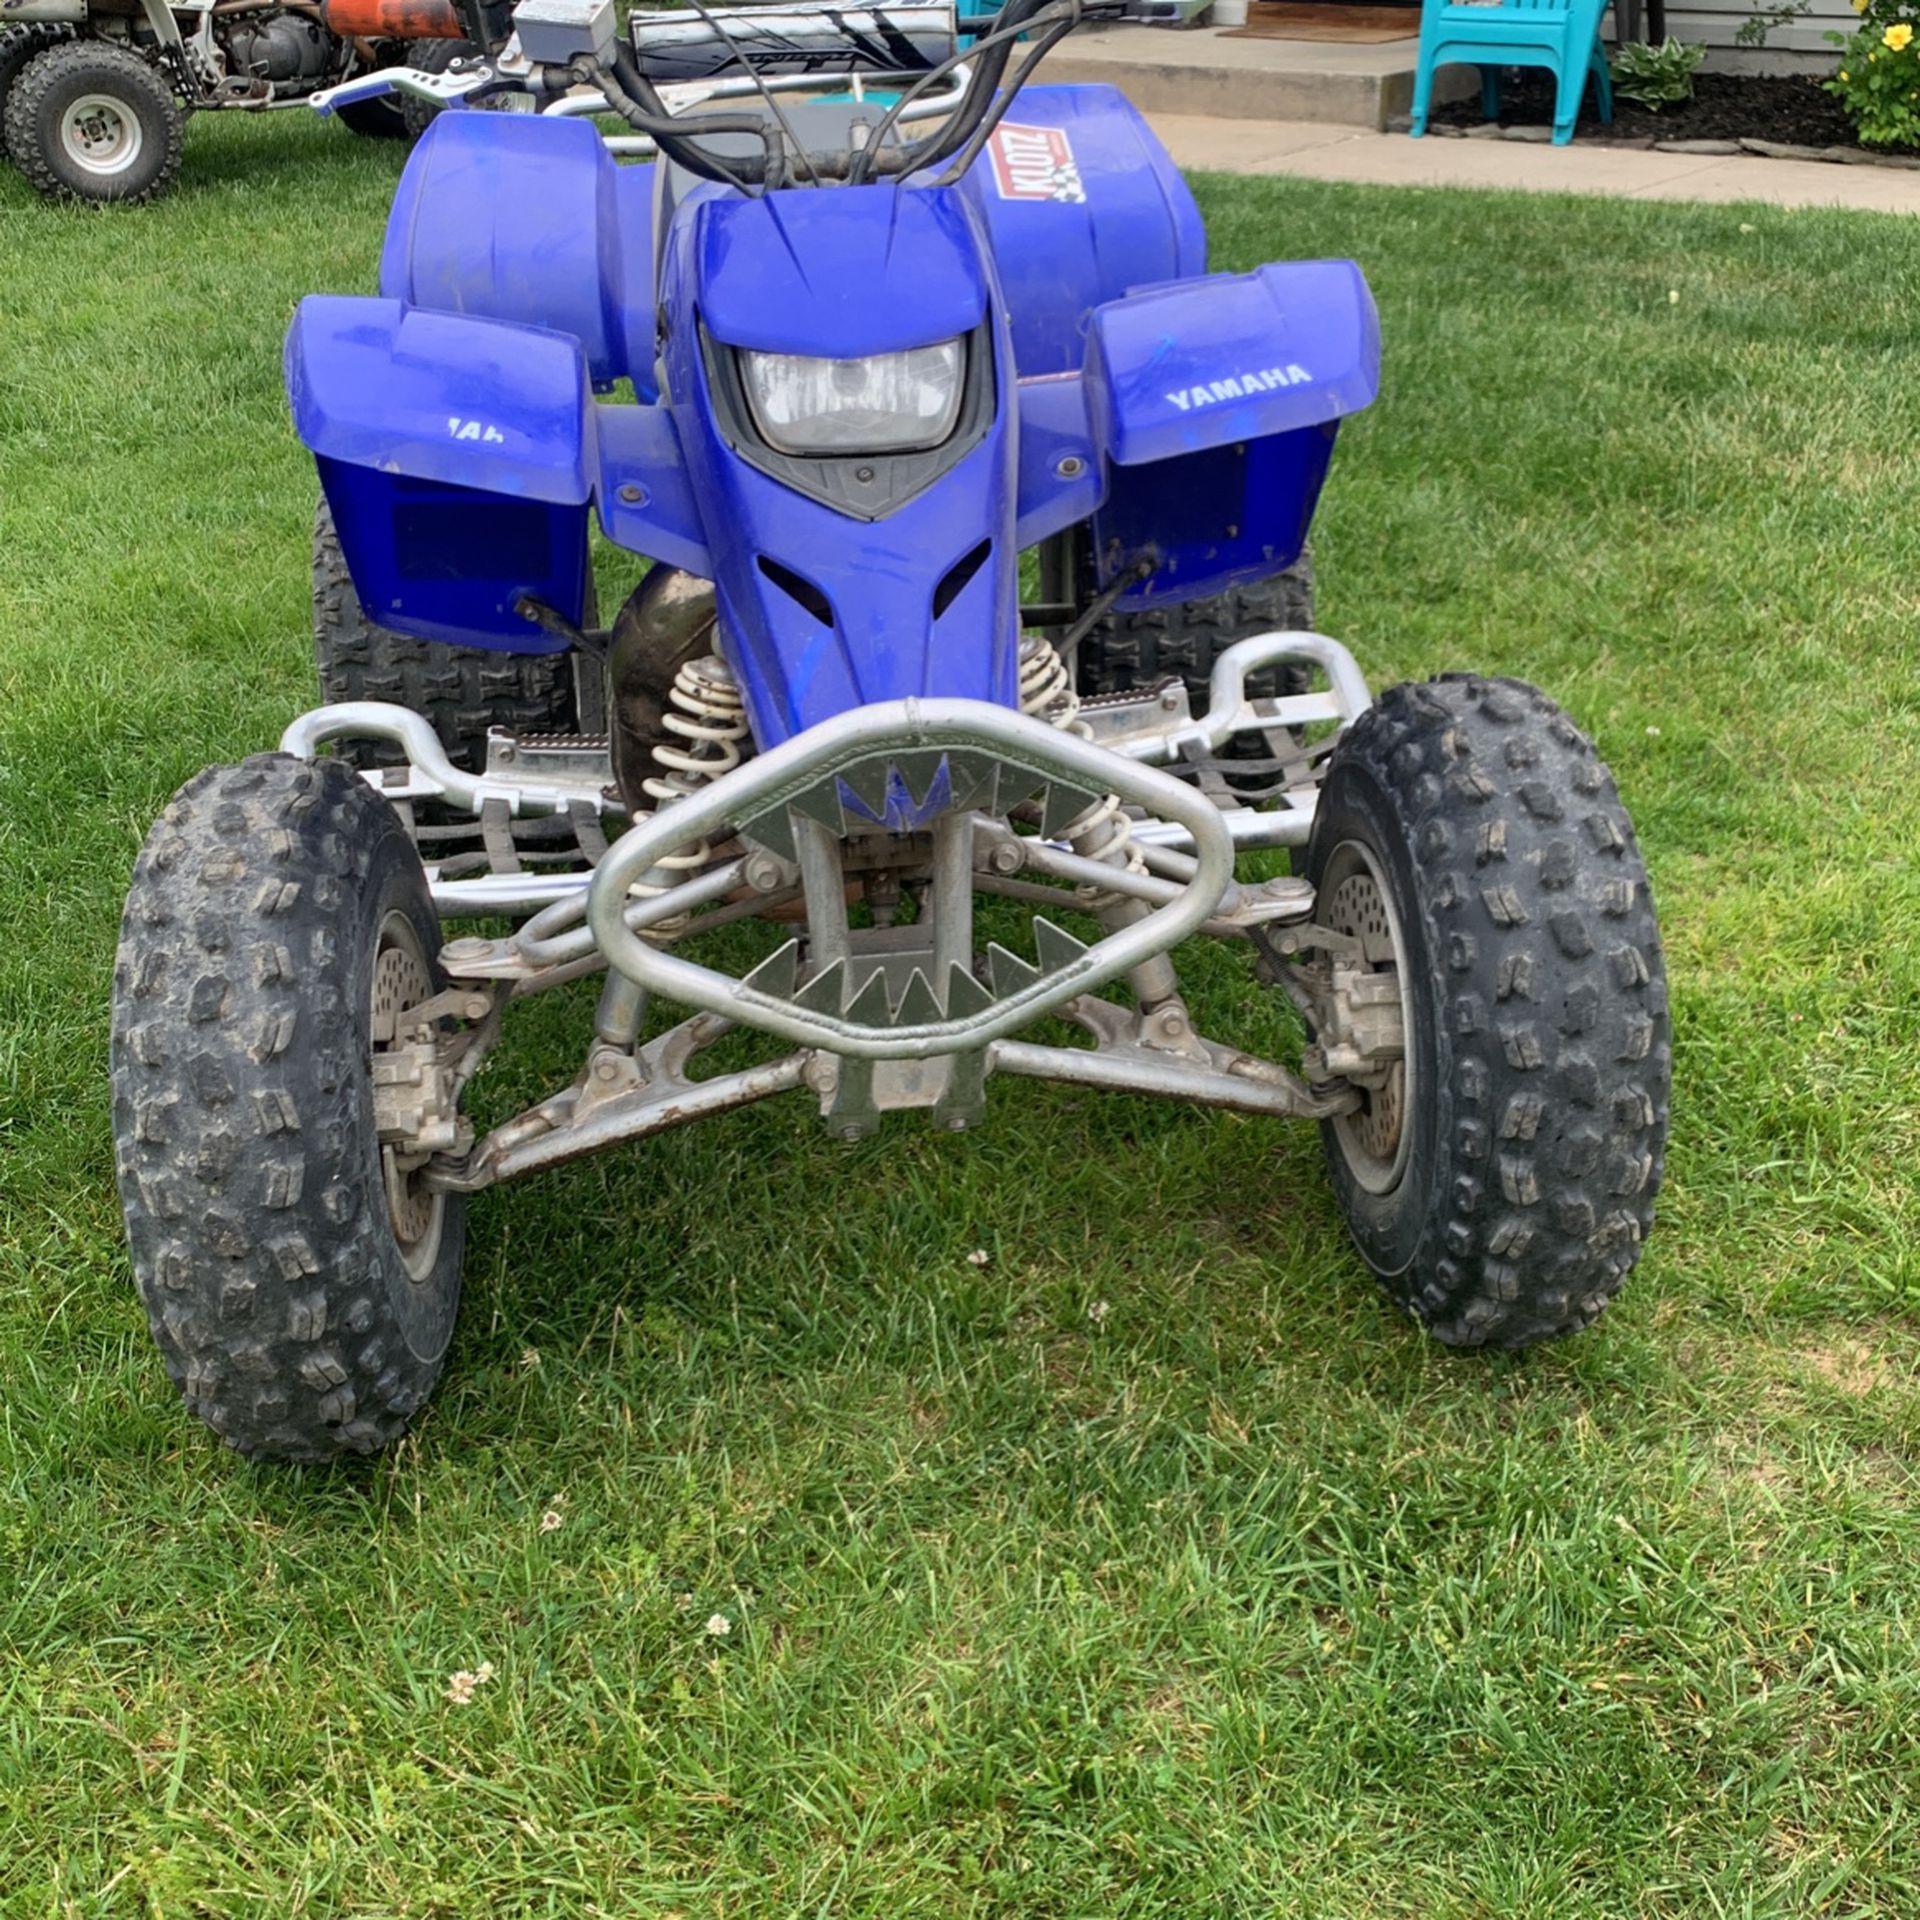 Photo Modded Out Blaster Looking For Trade For Any Dirtbike Or Quad